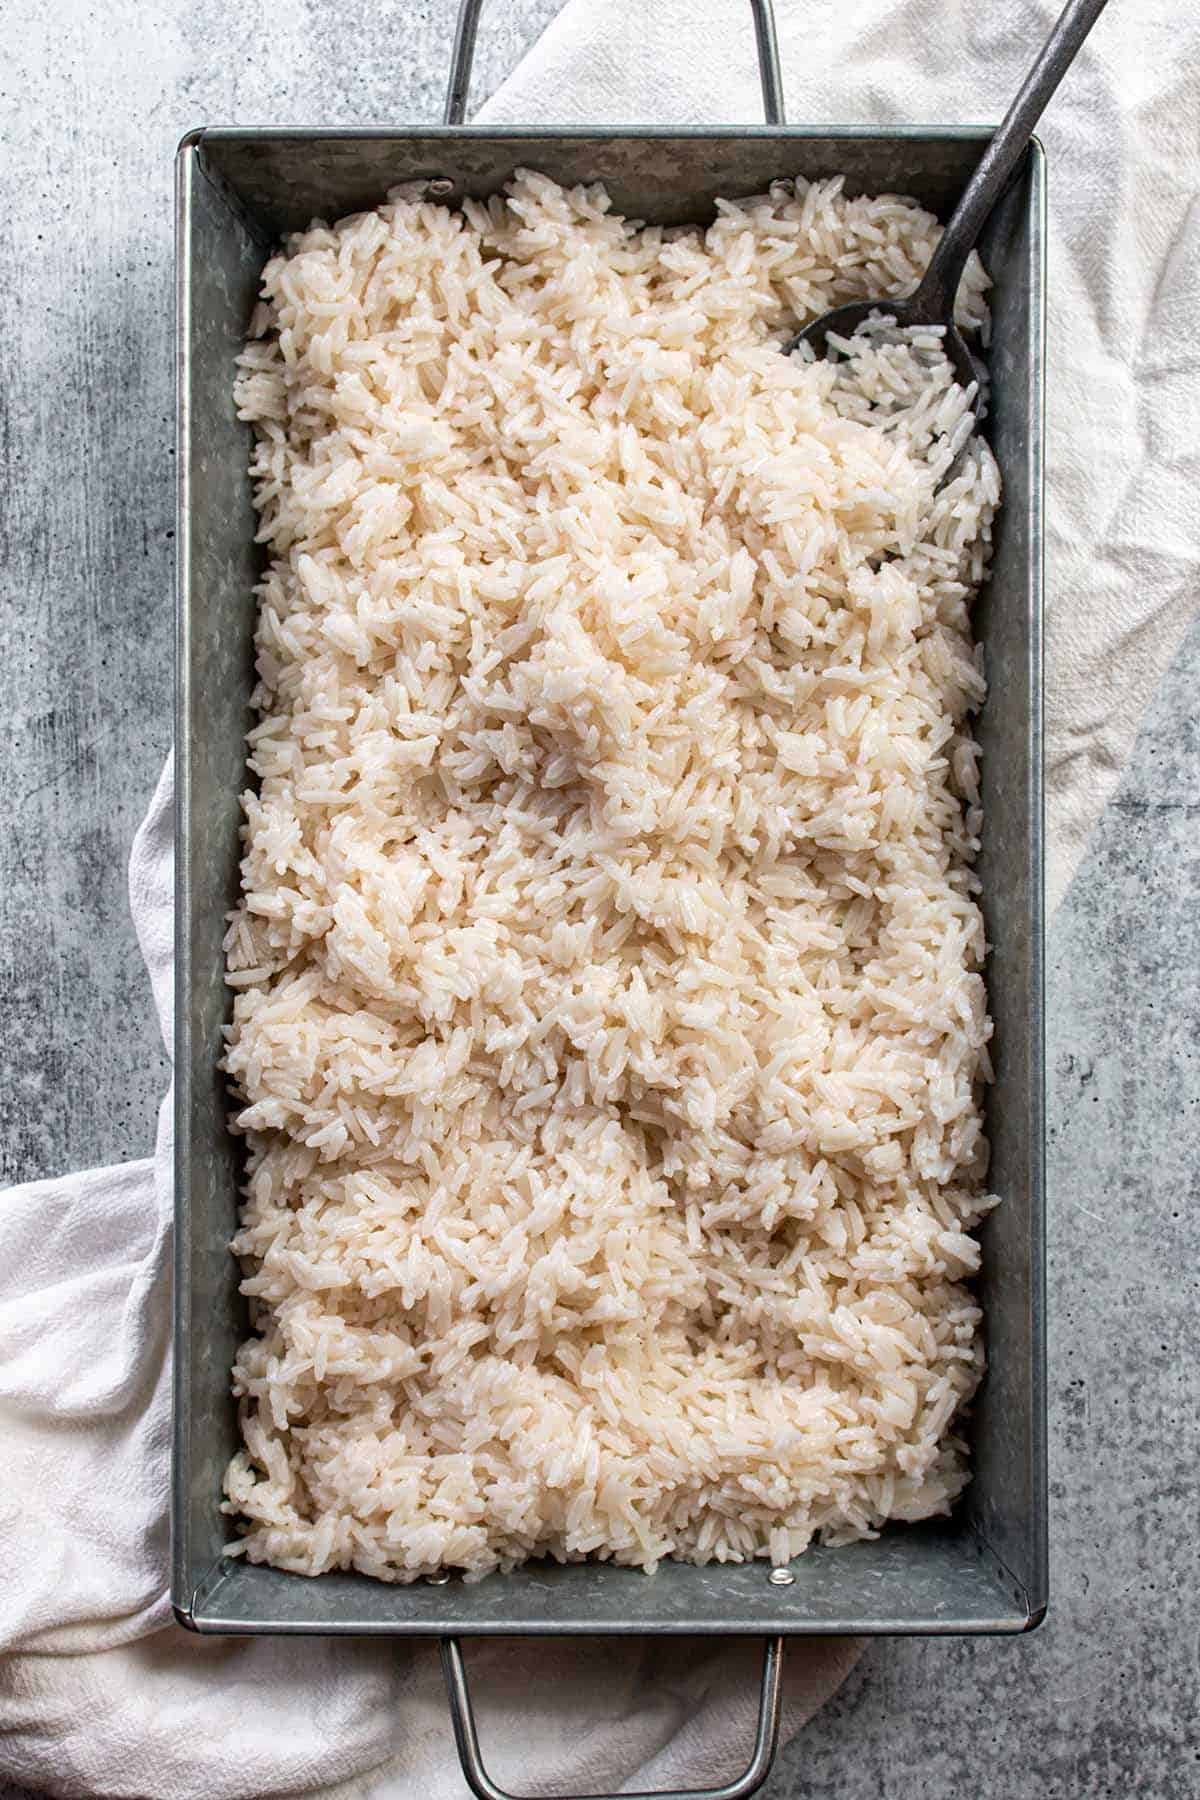 A metal tray with a pile of coconut rice and a metal slotted spoon.